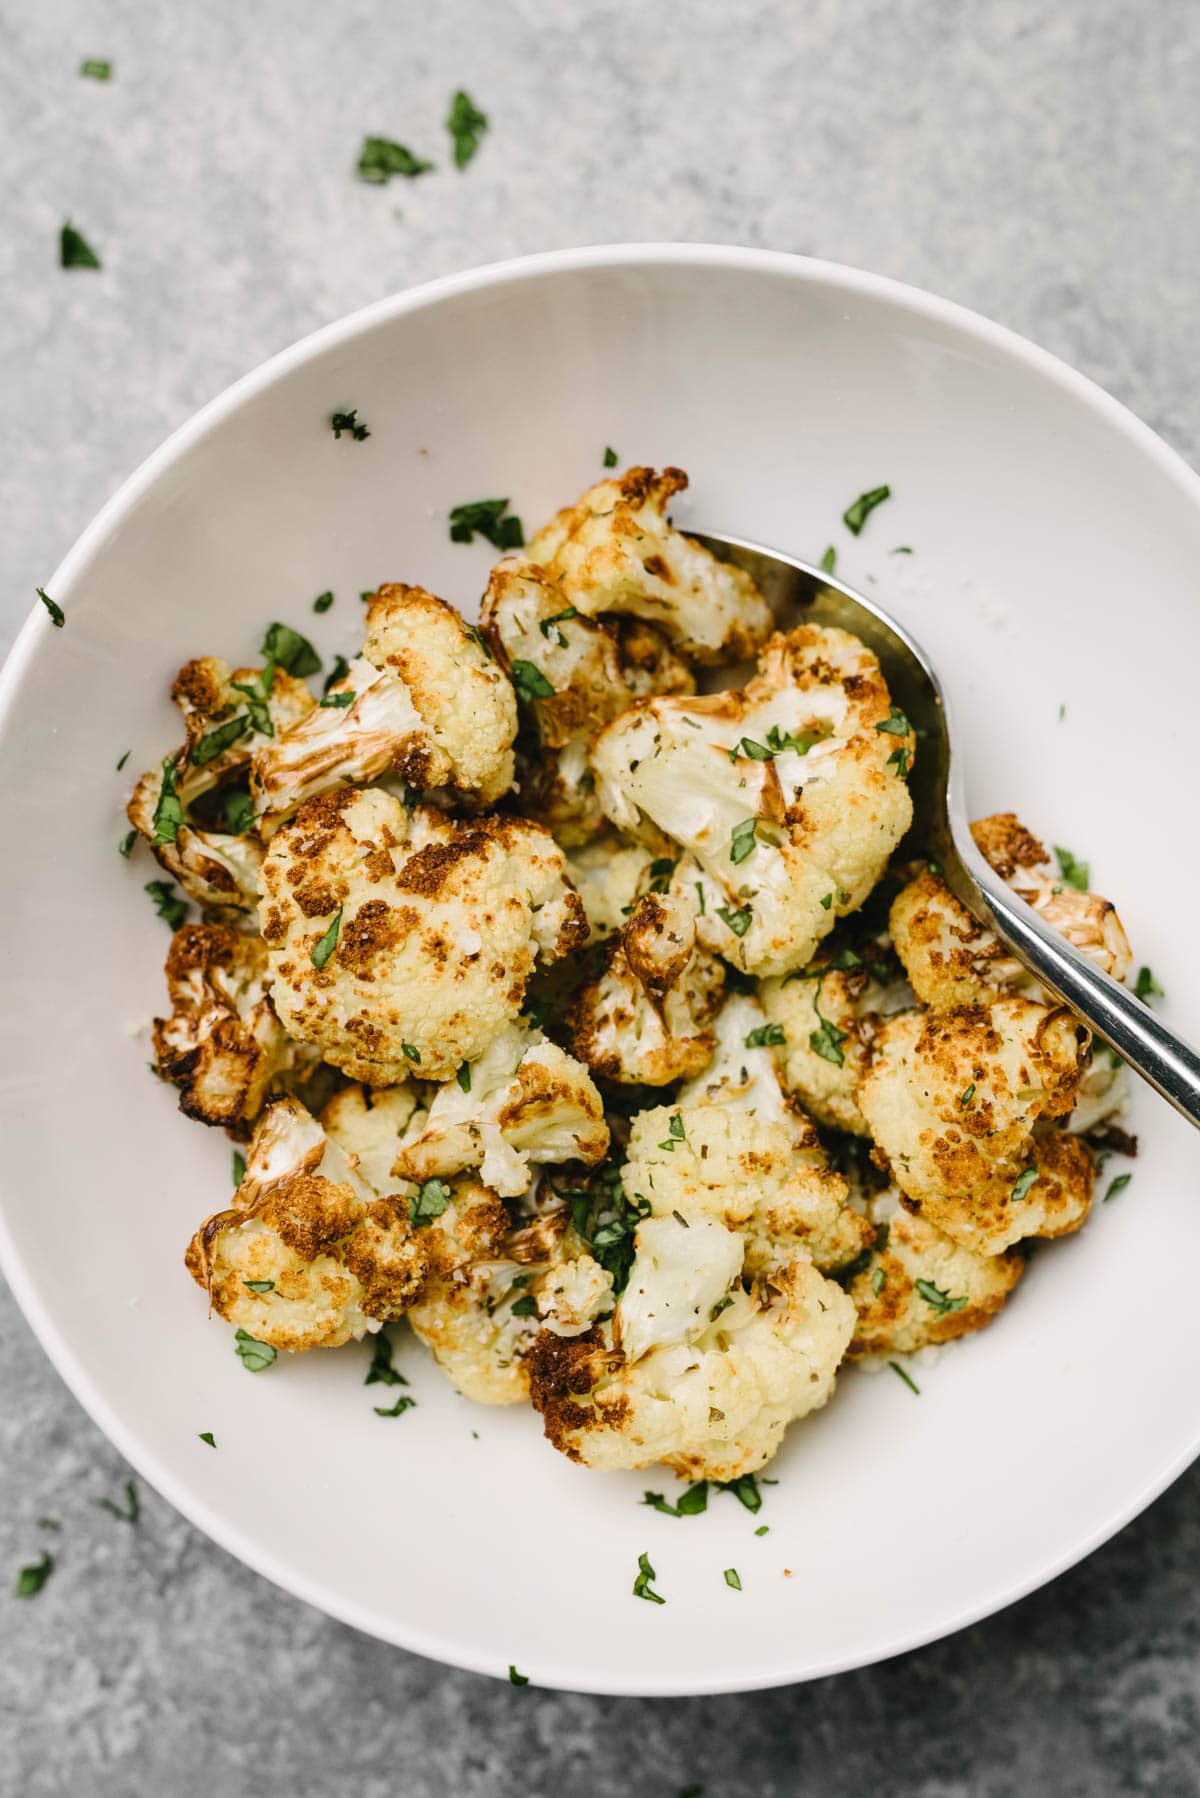 A spoon tucked into a bowl of roasted cauliflower florets, garnished with fresh chopped basil.